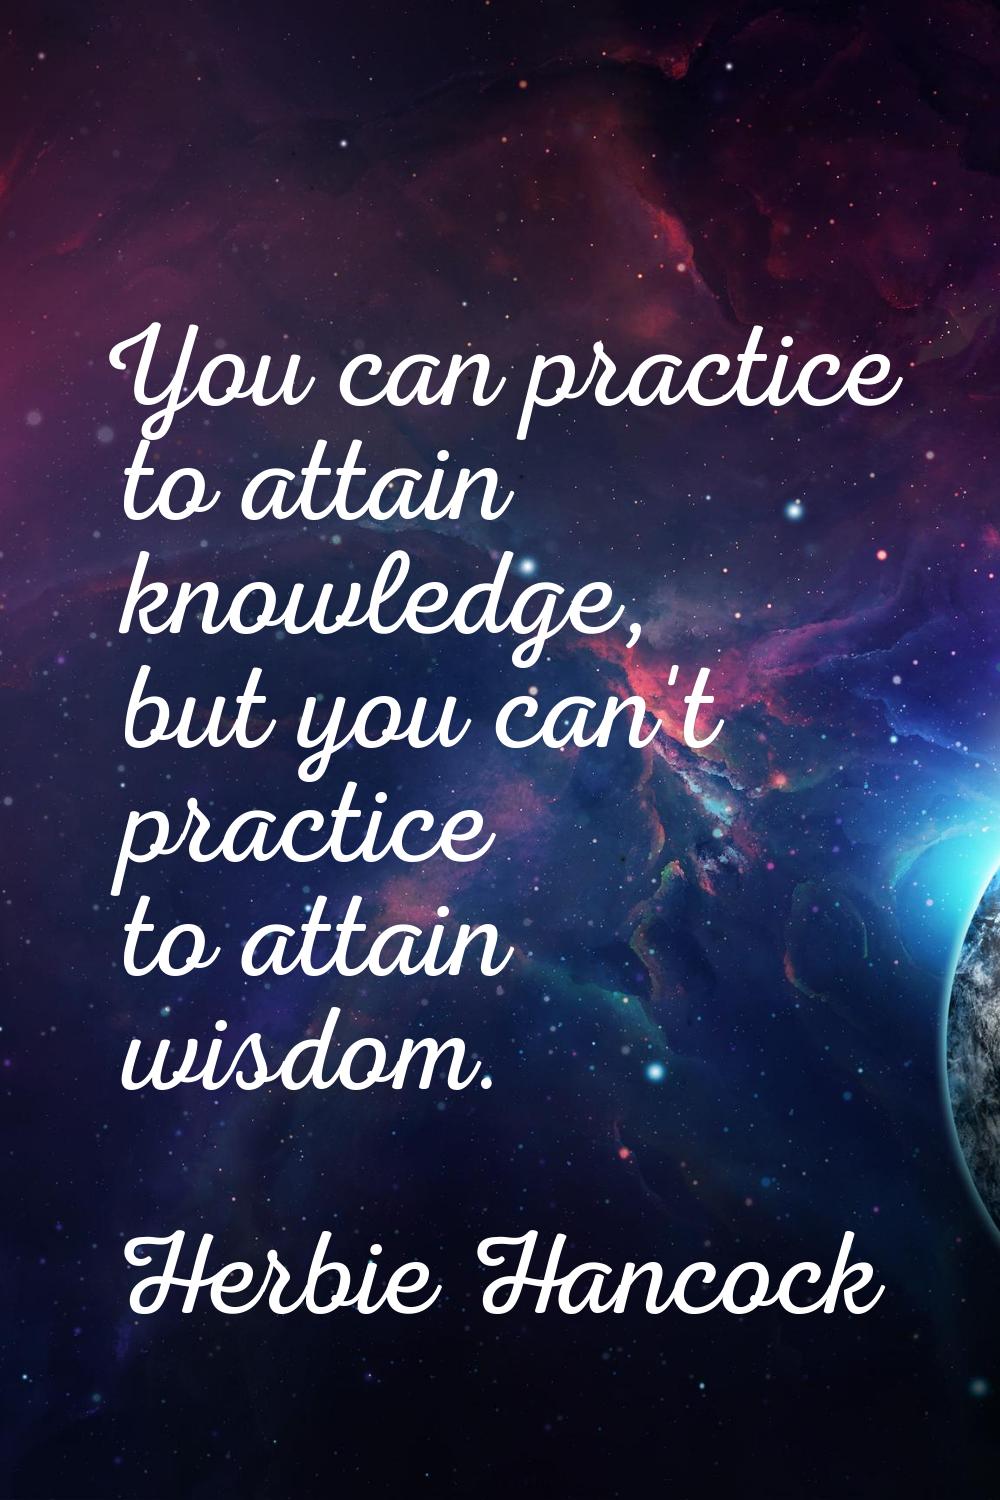 You can practice to attain knowledge, but you can't practice to attain wisdom.